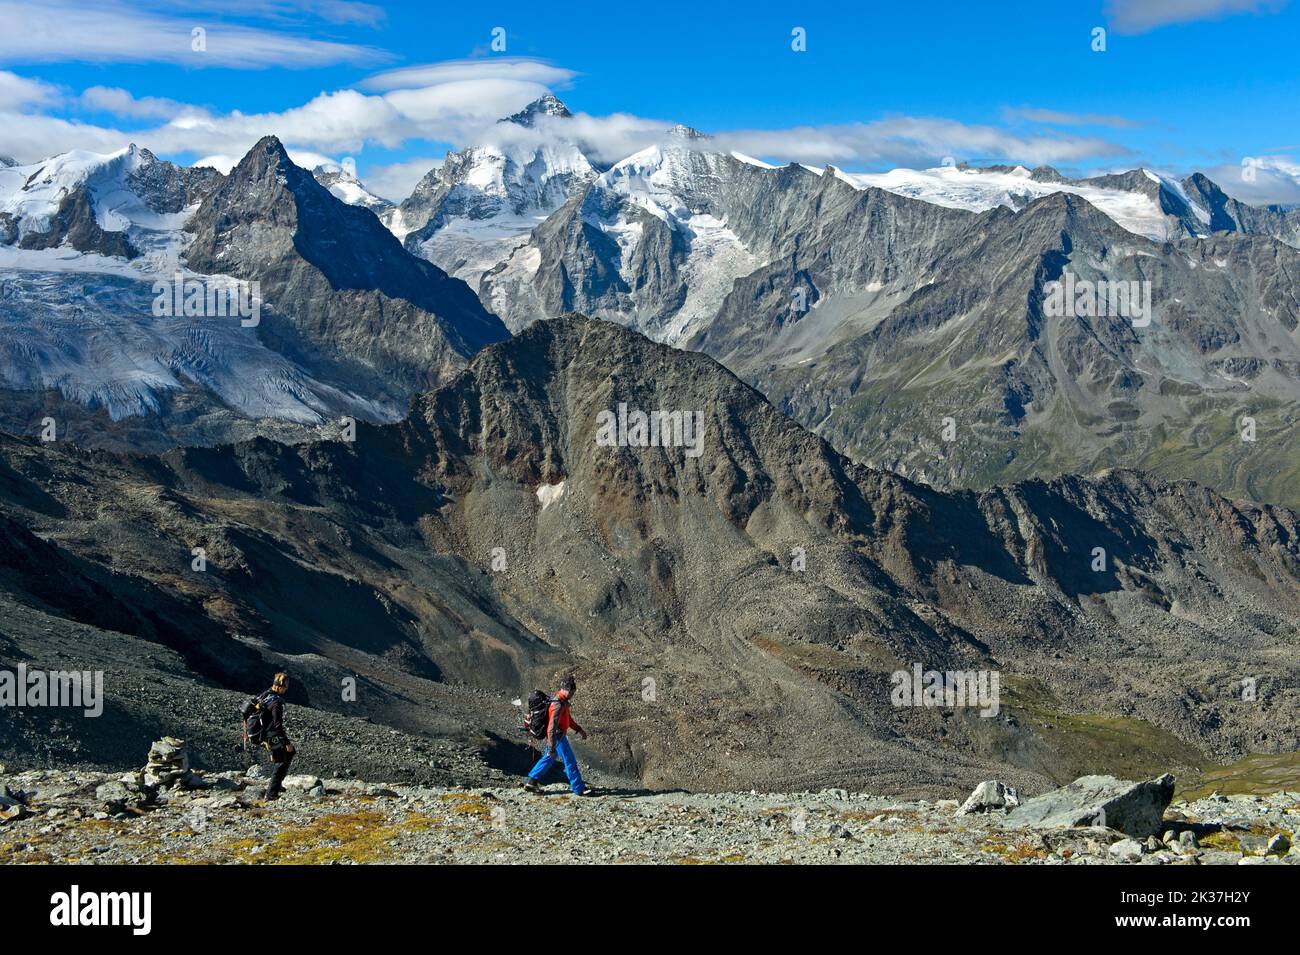 Mountain hikers hiking in the heart of the Valais Alps, peaks f.l.t.r. Blanc de Moming, Besso, Dent Blanche, Grand Cornier, Zinal, Val d'Anniviers, Va Stock Photo